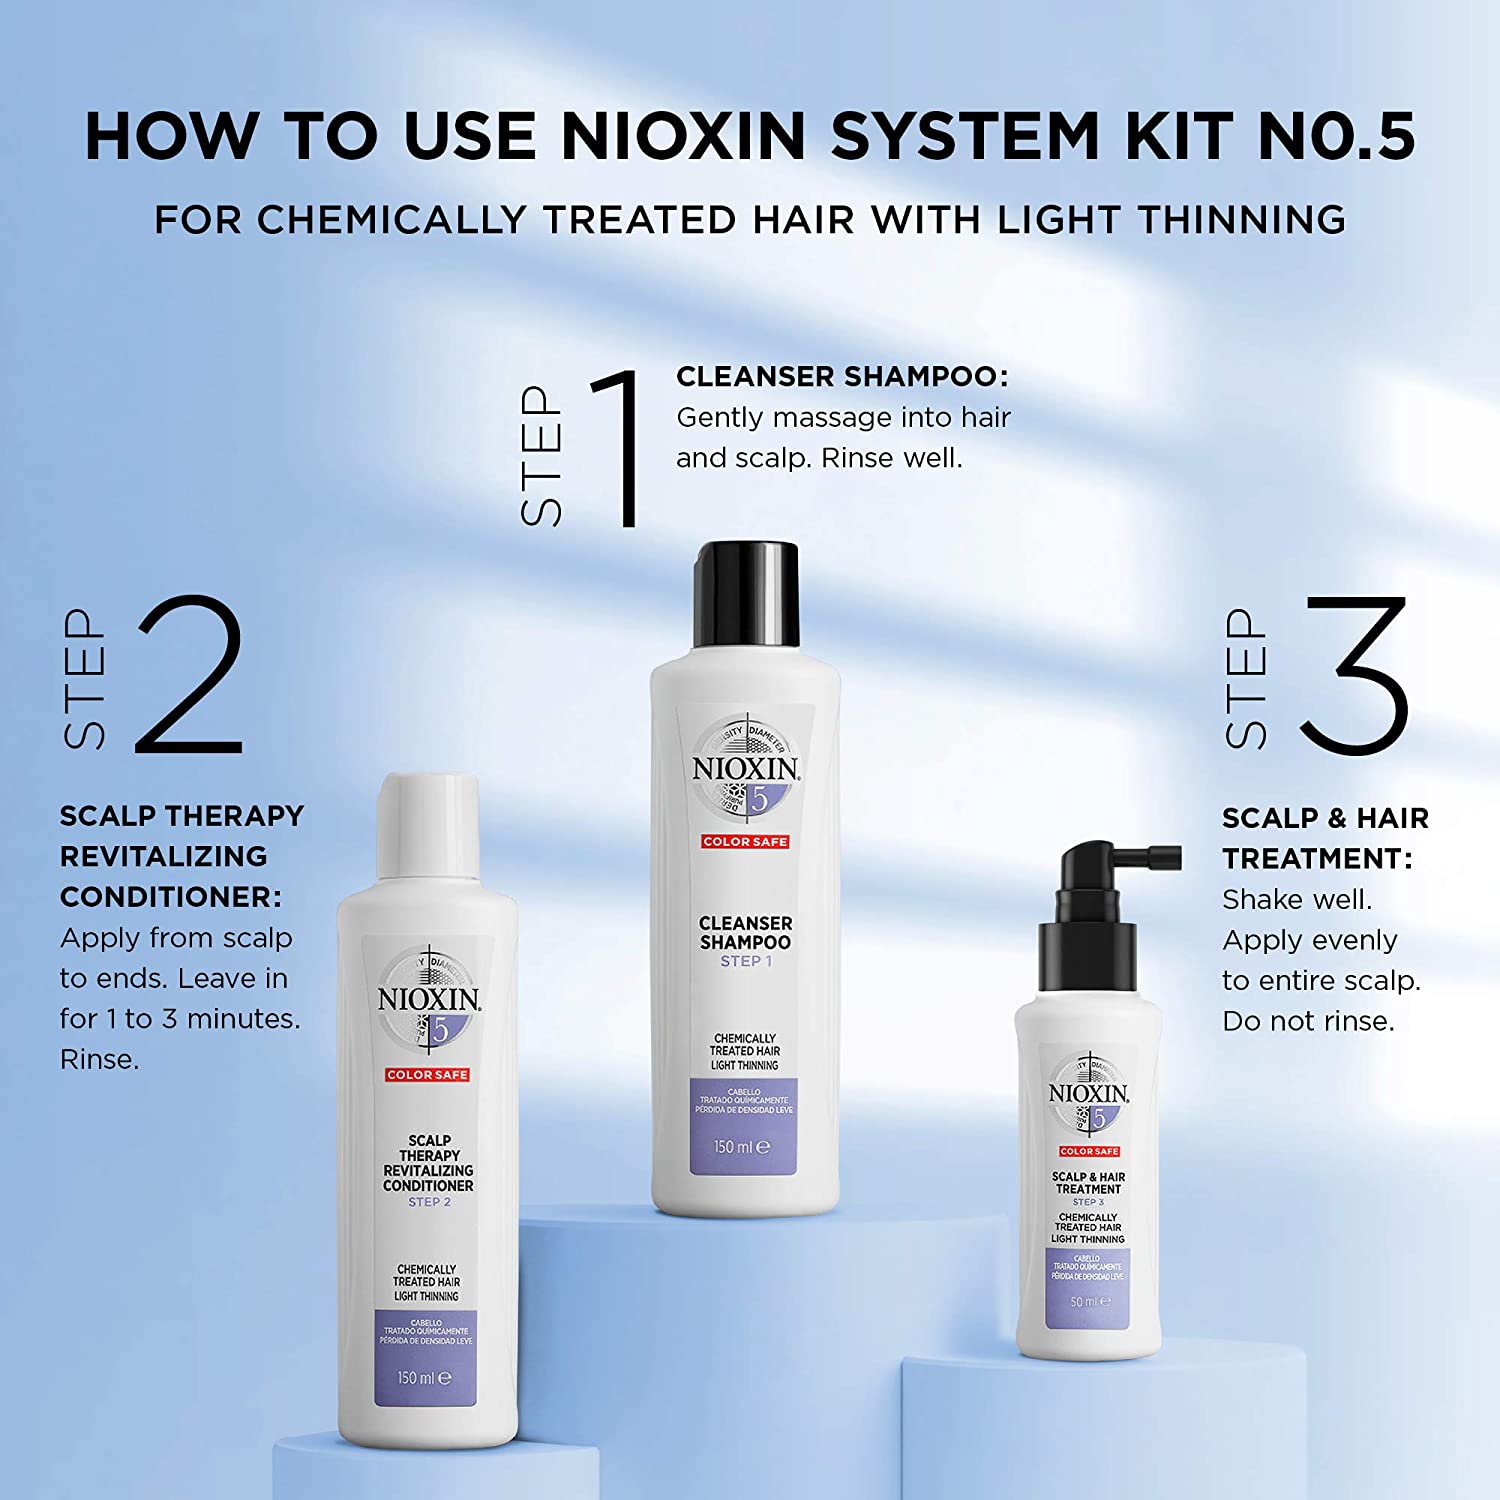 Nioxin Haircare Kit for Chemilcally Treated Hair with Light Thinning 